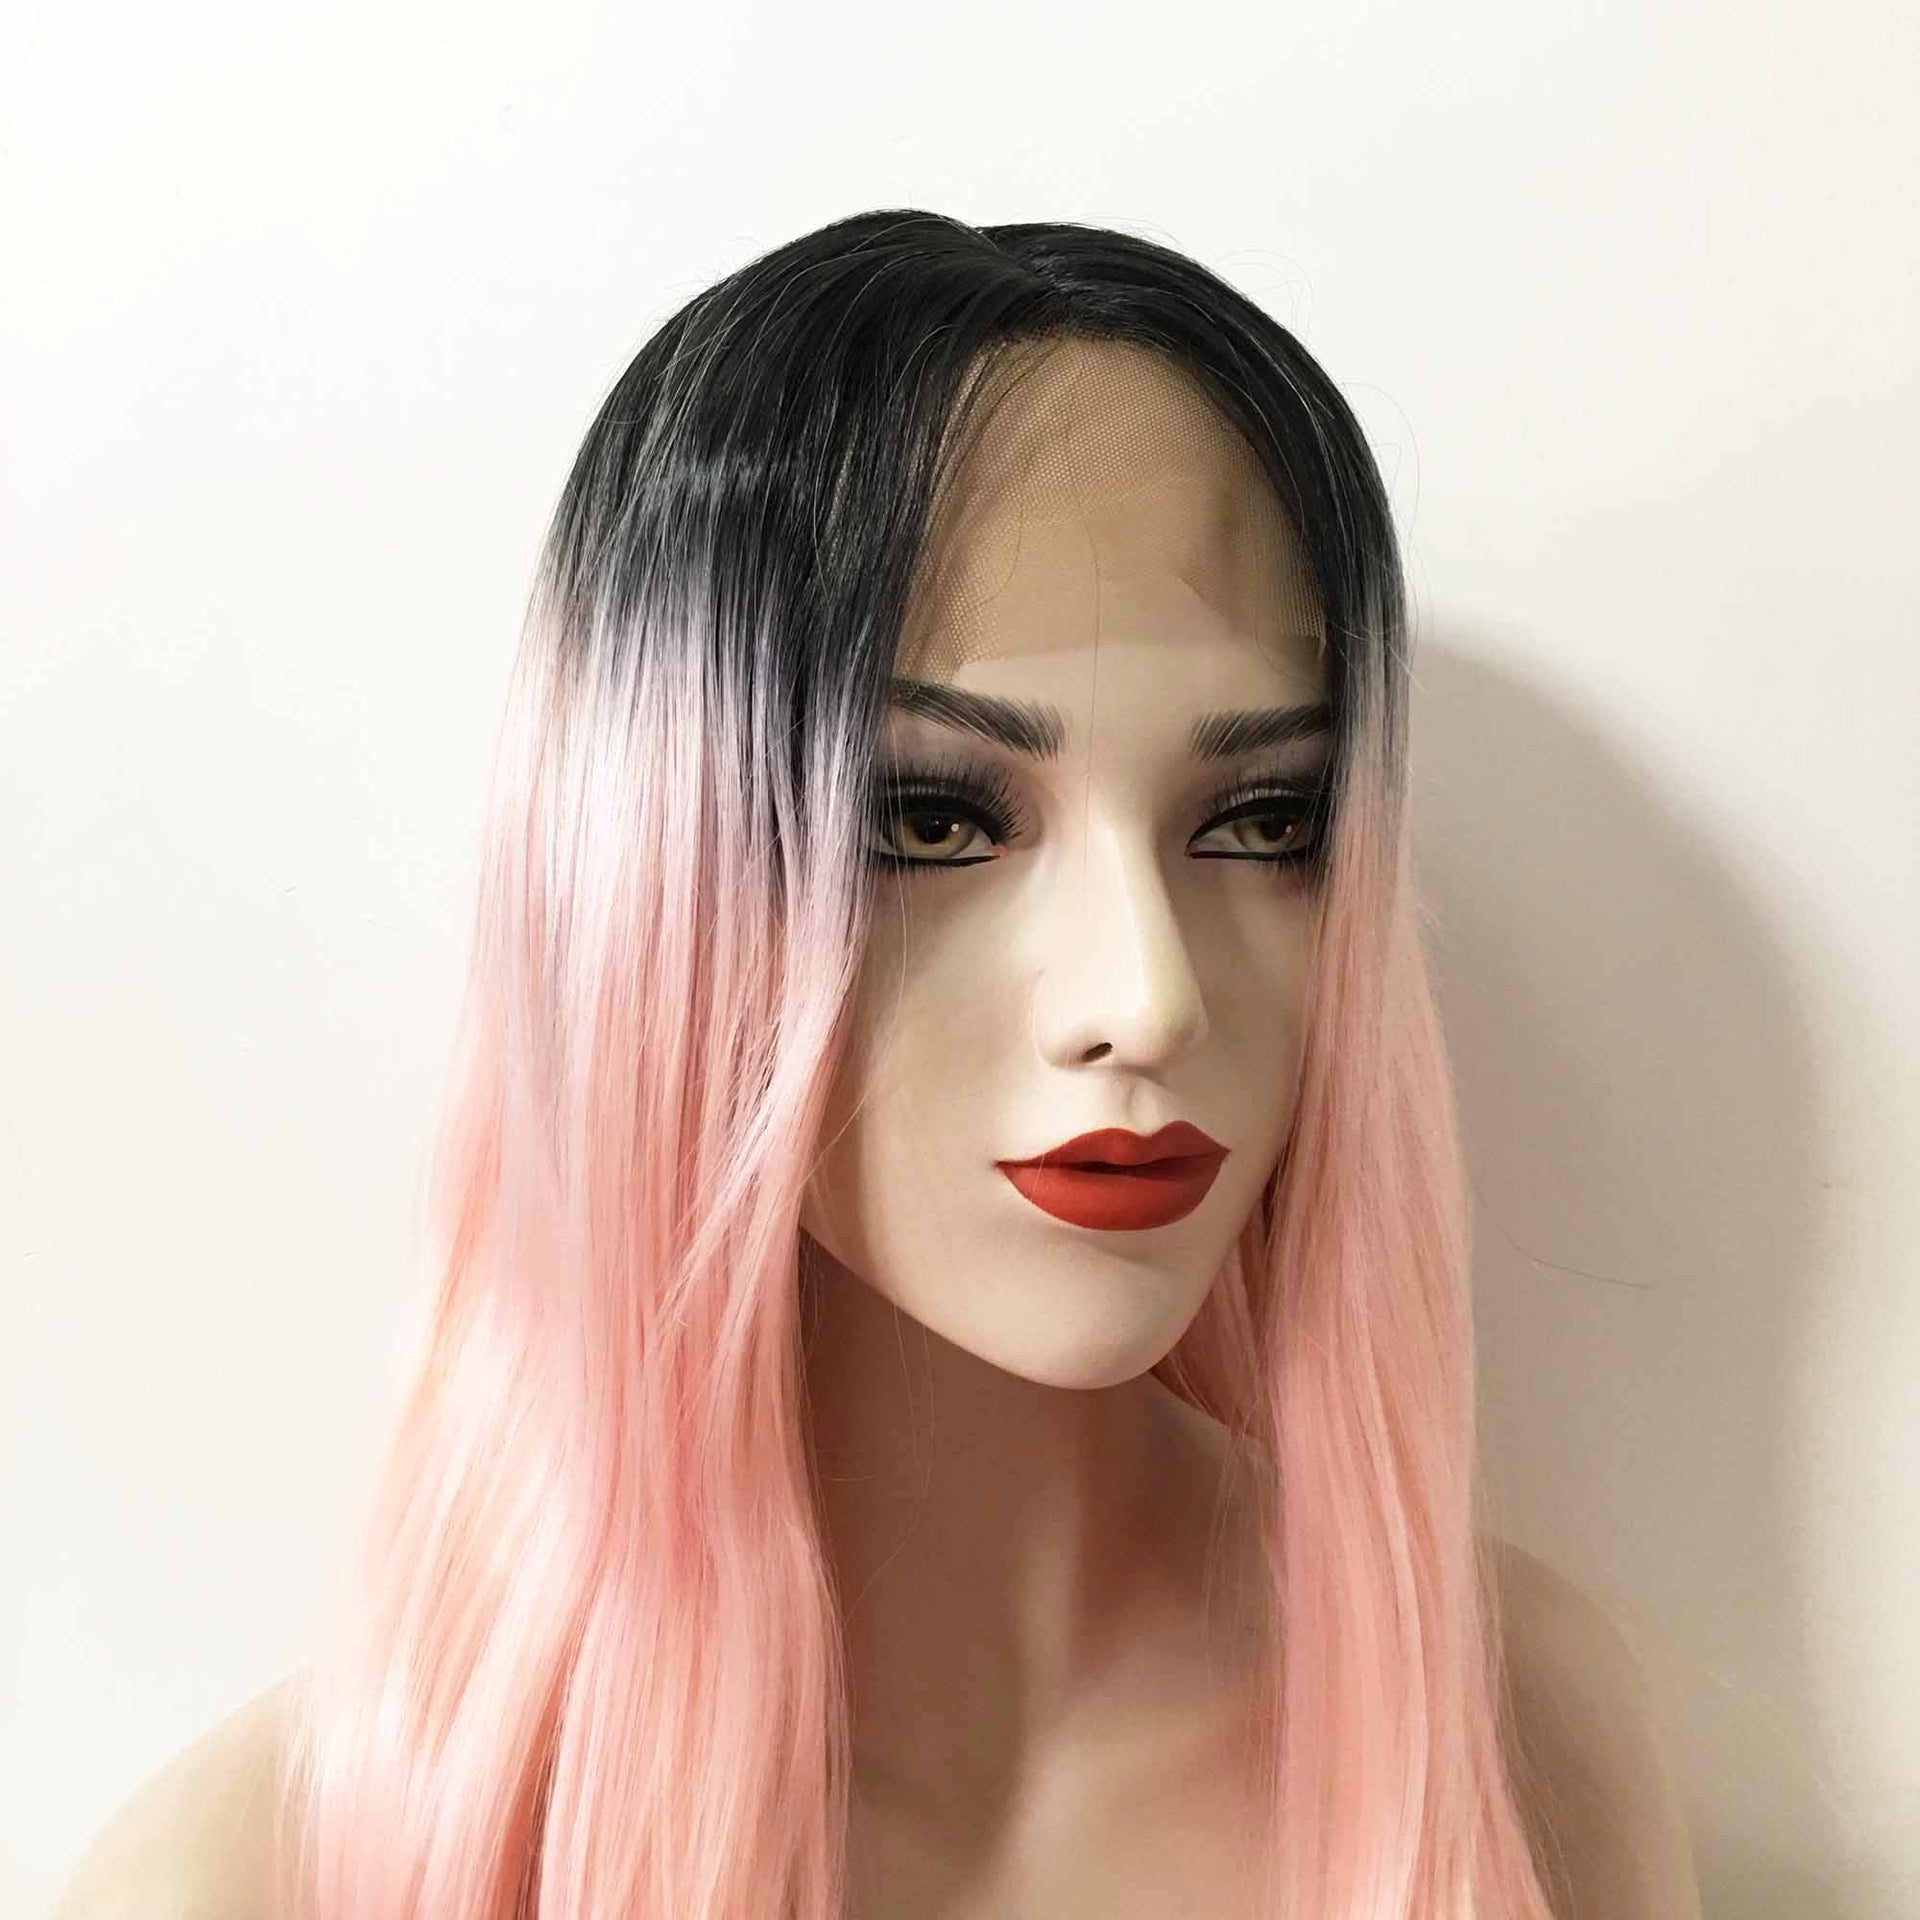 nevermindyrhead Women Ombre Pink Lace Front Dark Root Long Straight Middle Part Wig